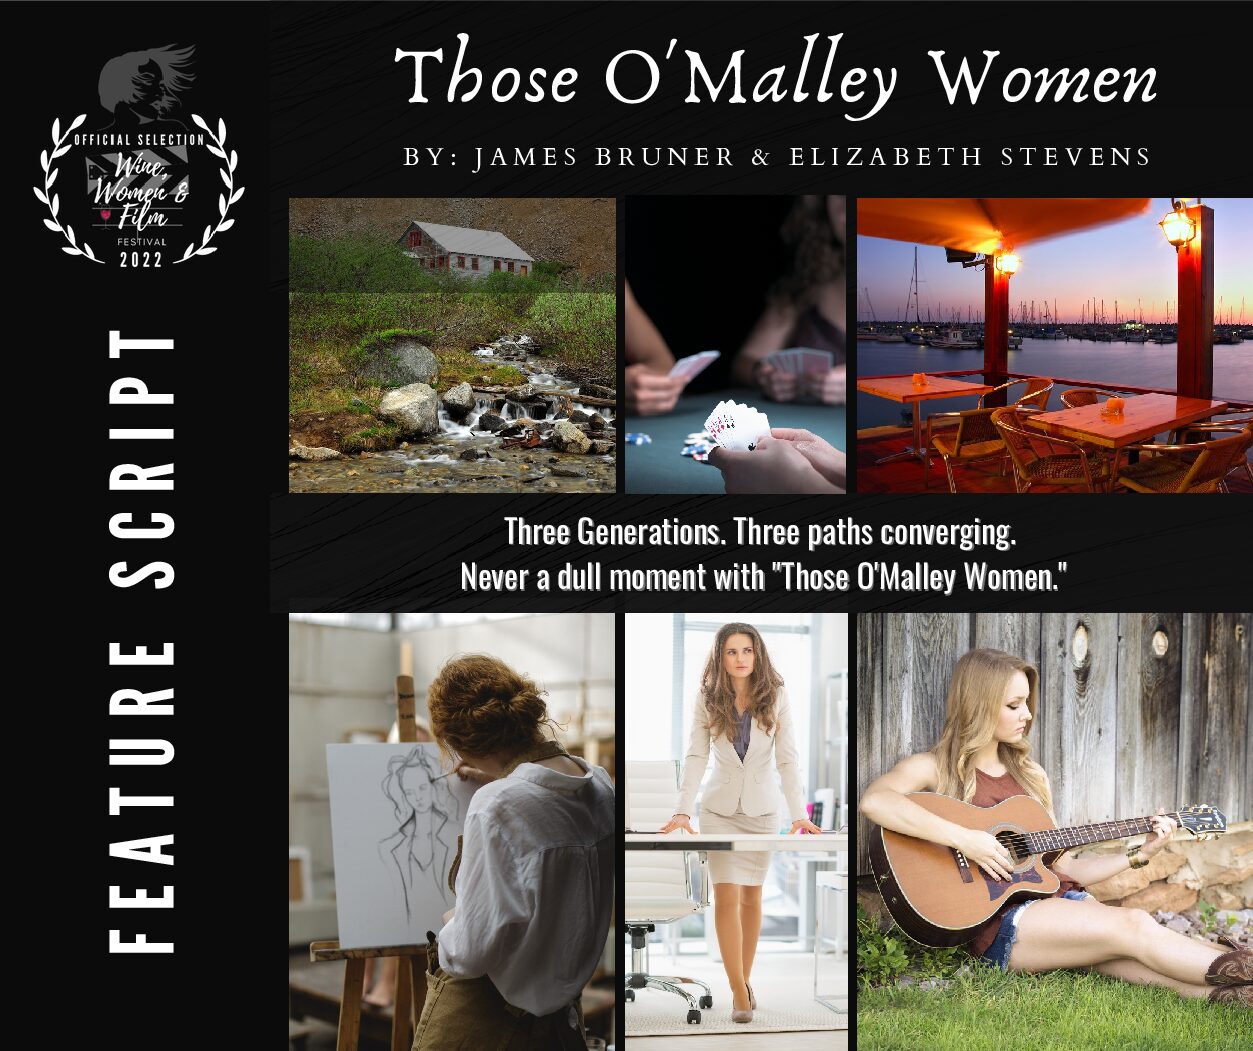 THOSE O’MALLEY WOMEN selected for 2022 WINE, WOMEN & SONG FILM FESTIVAL – and THE HOUSTON COMEDY FILM FESTIVAL!!!